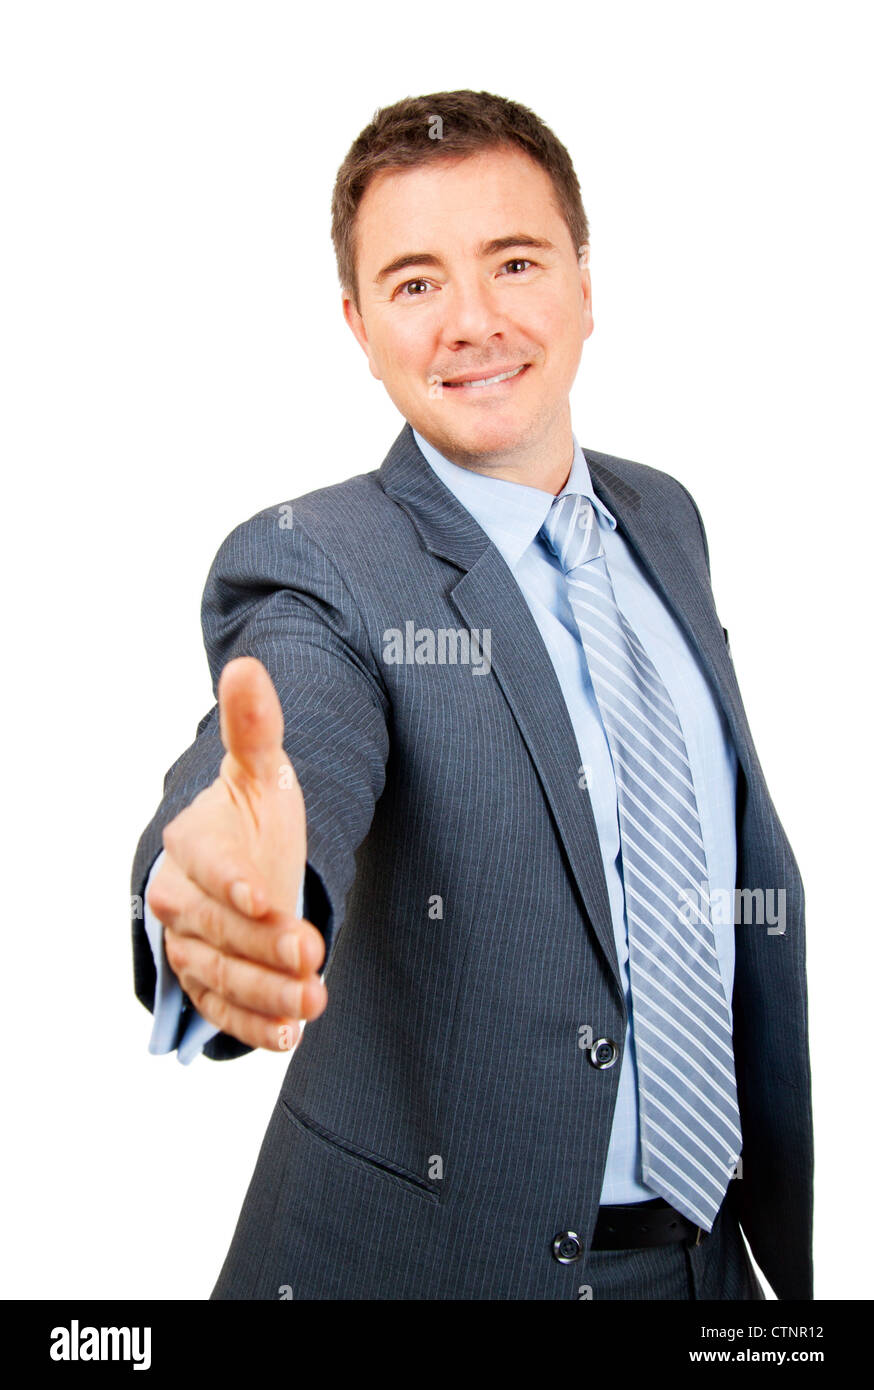 Confident business man holding out hand in friendly hand shake gesture on isolated background Stock Photo